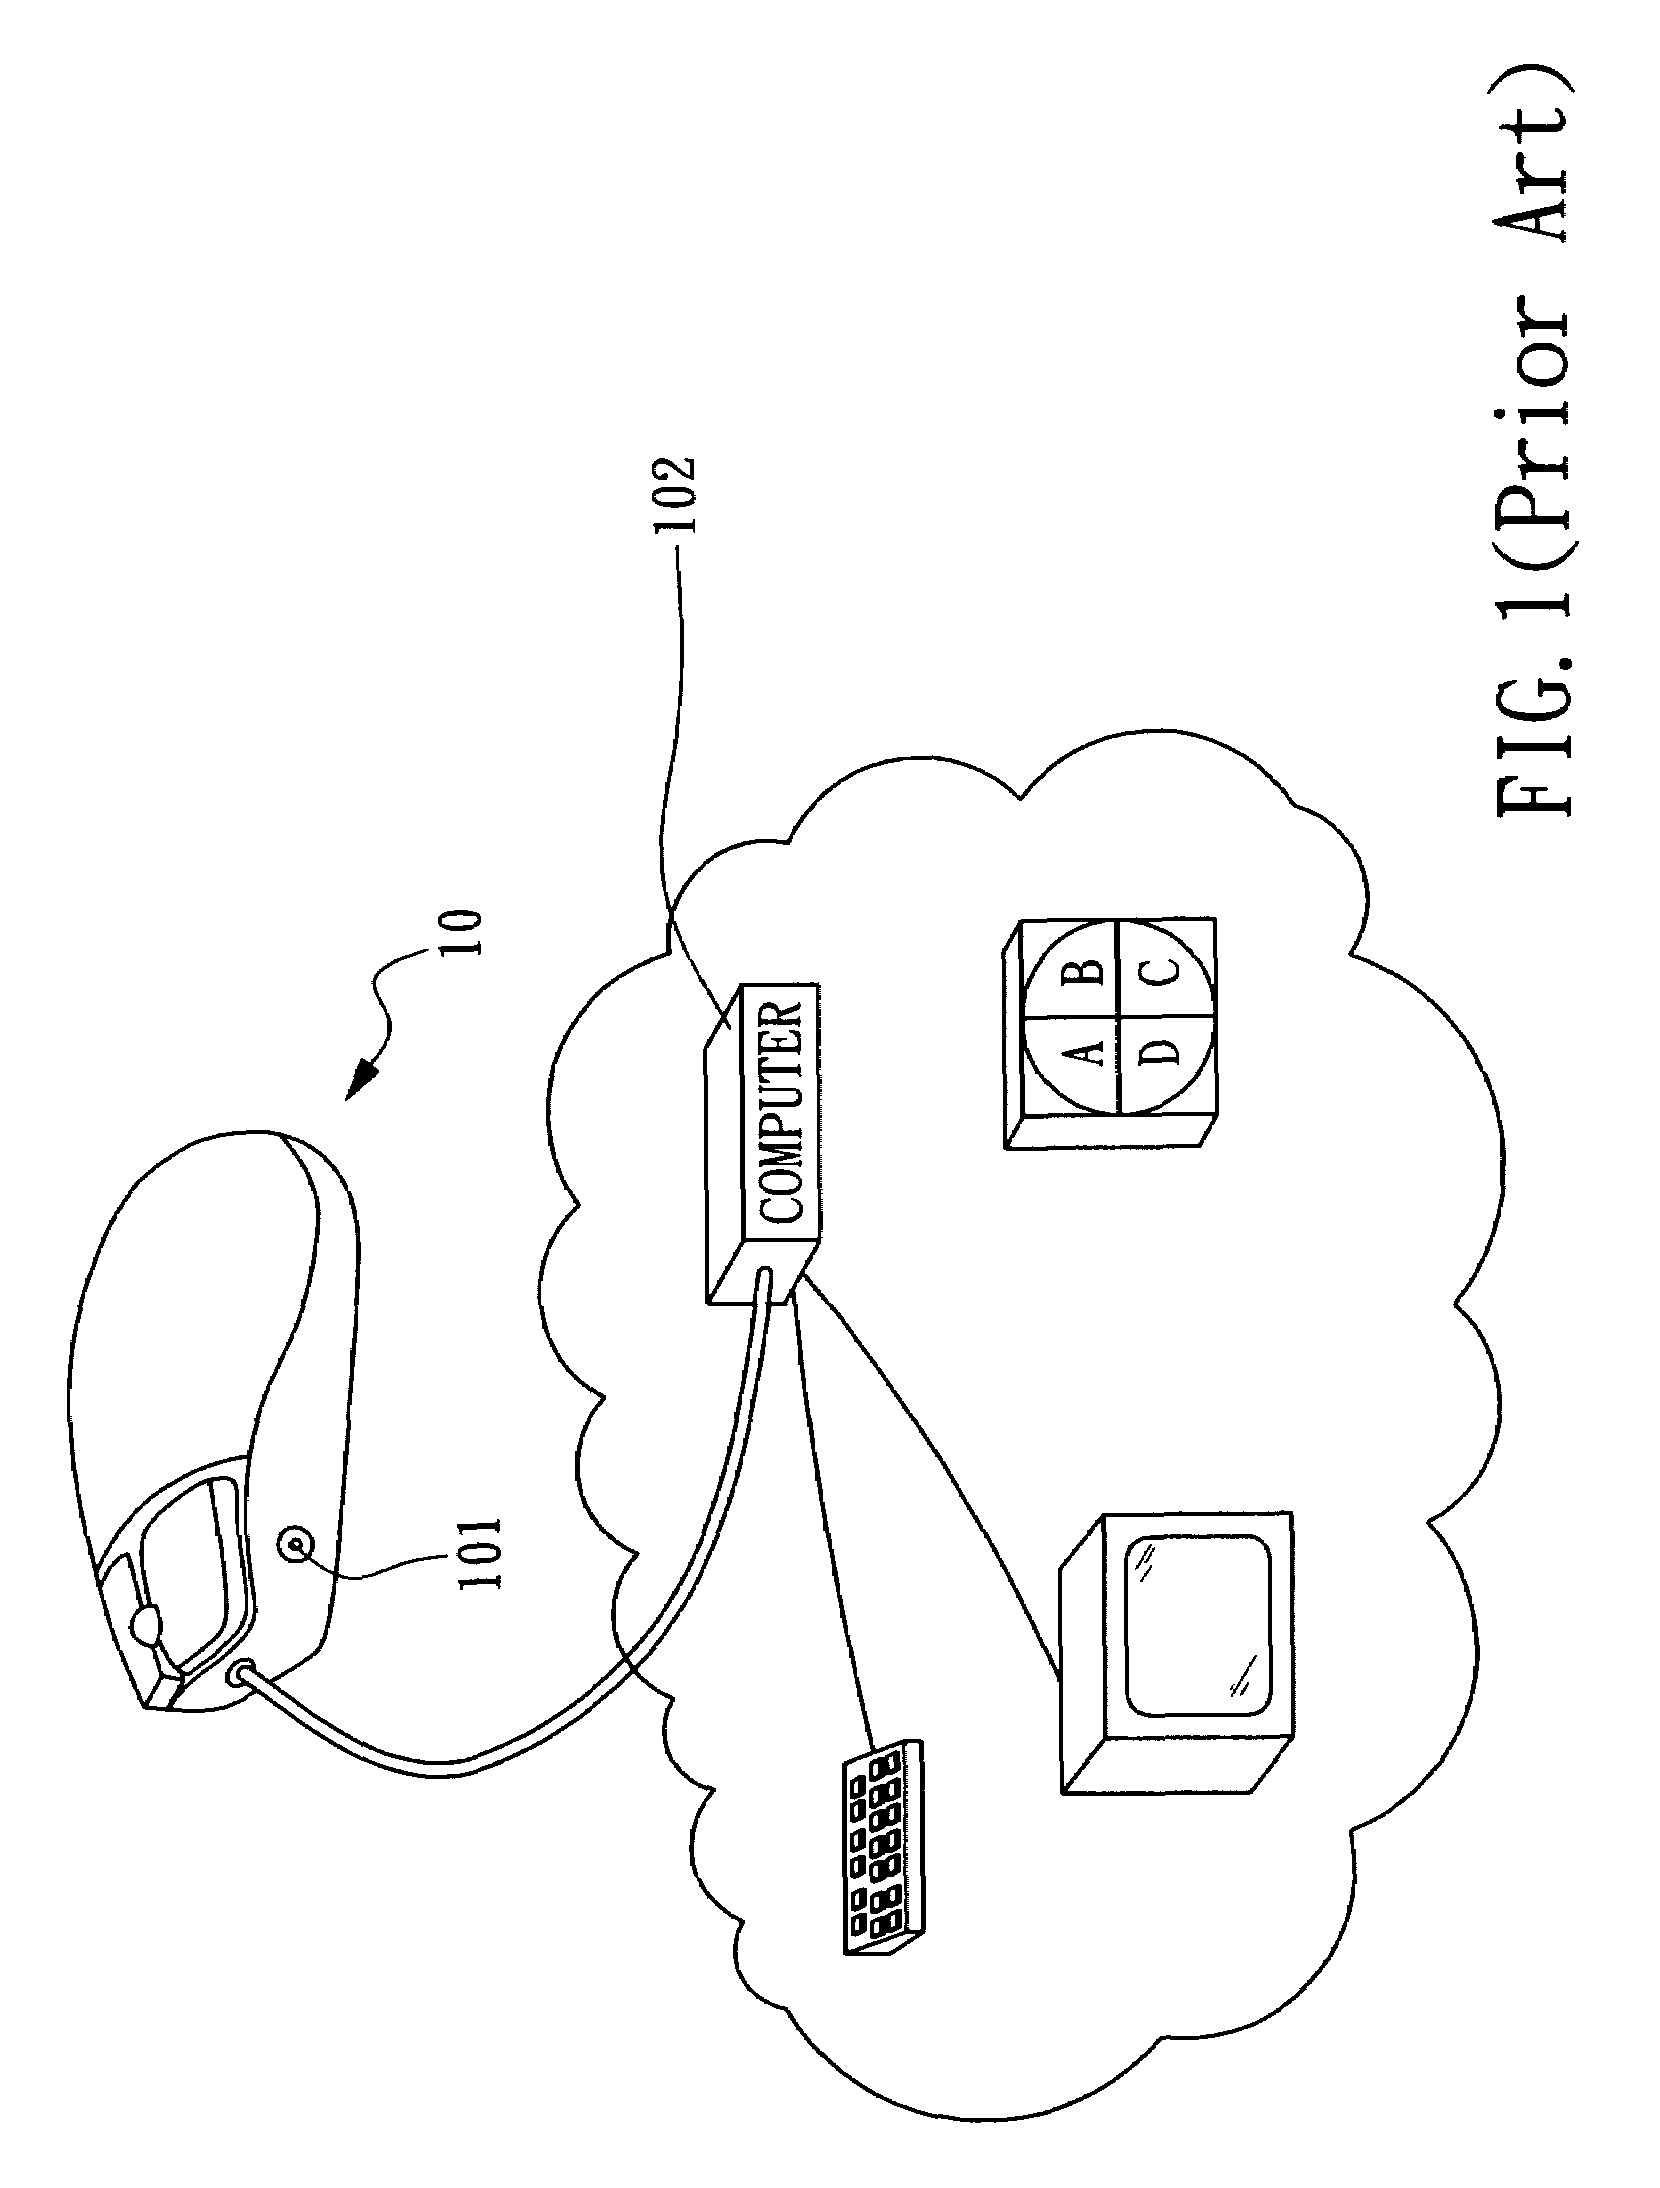 Interactive gaming method and apparatus with emotion perception ability